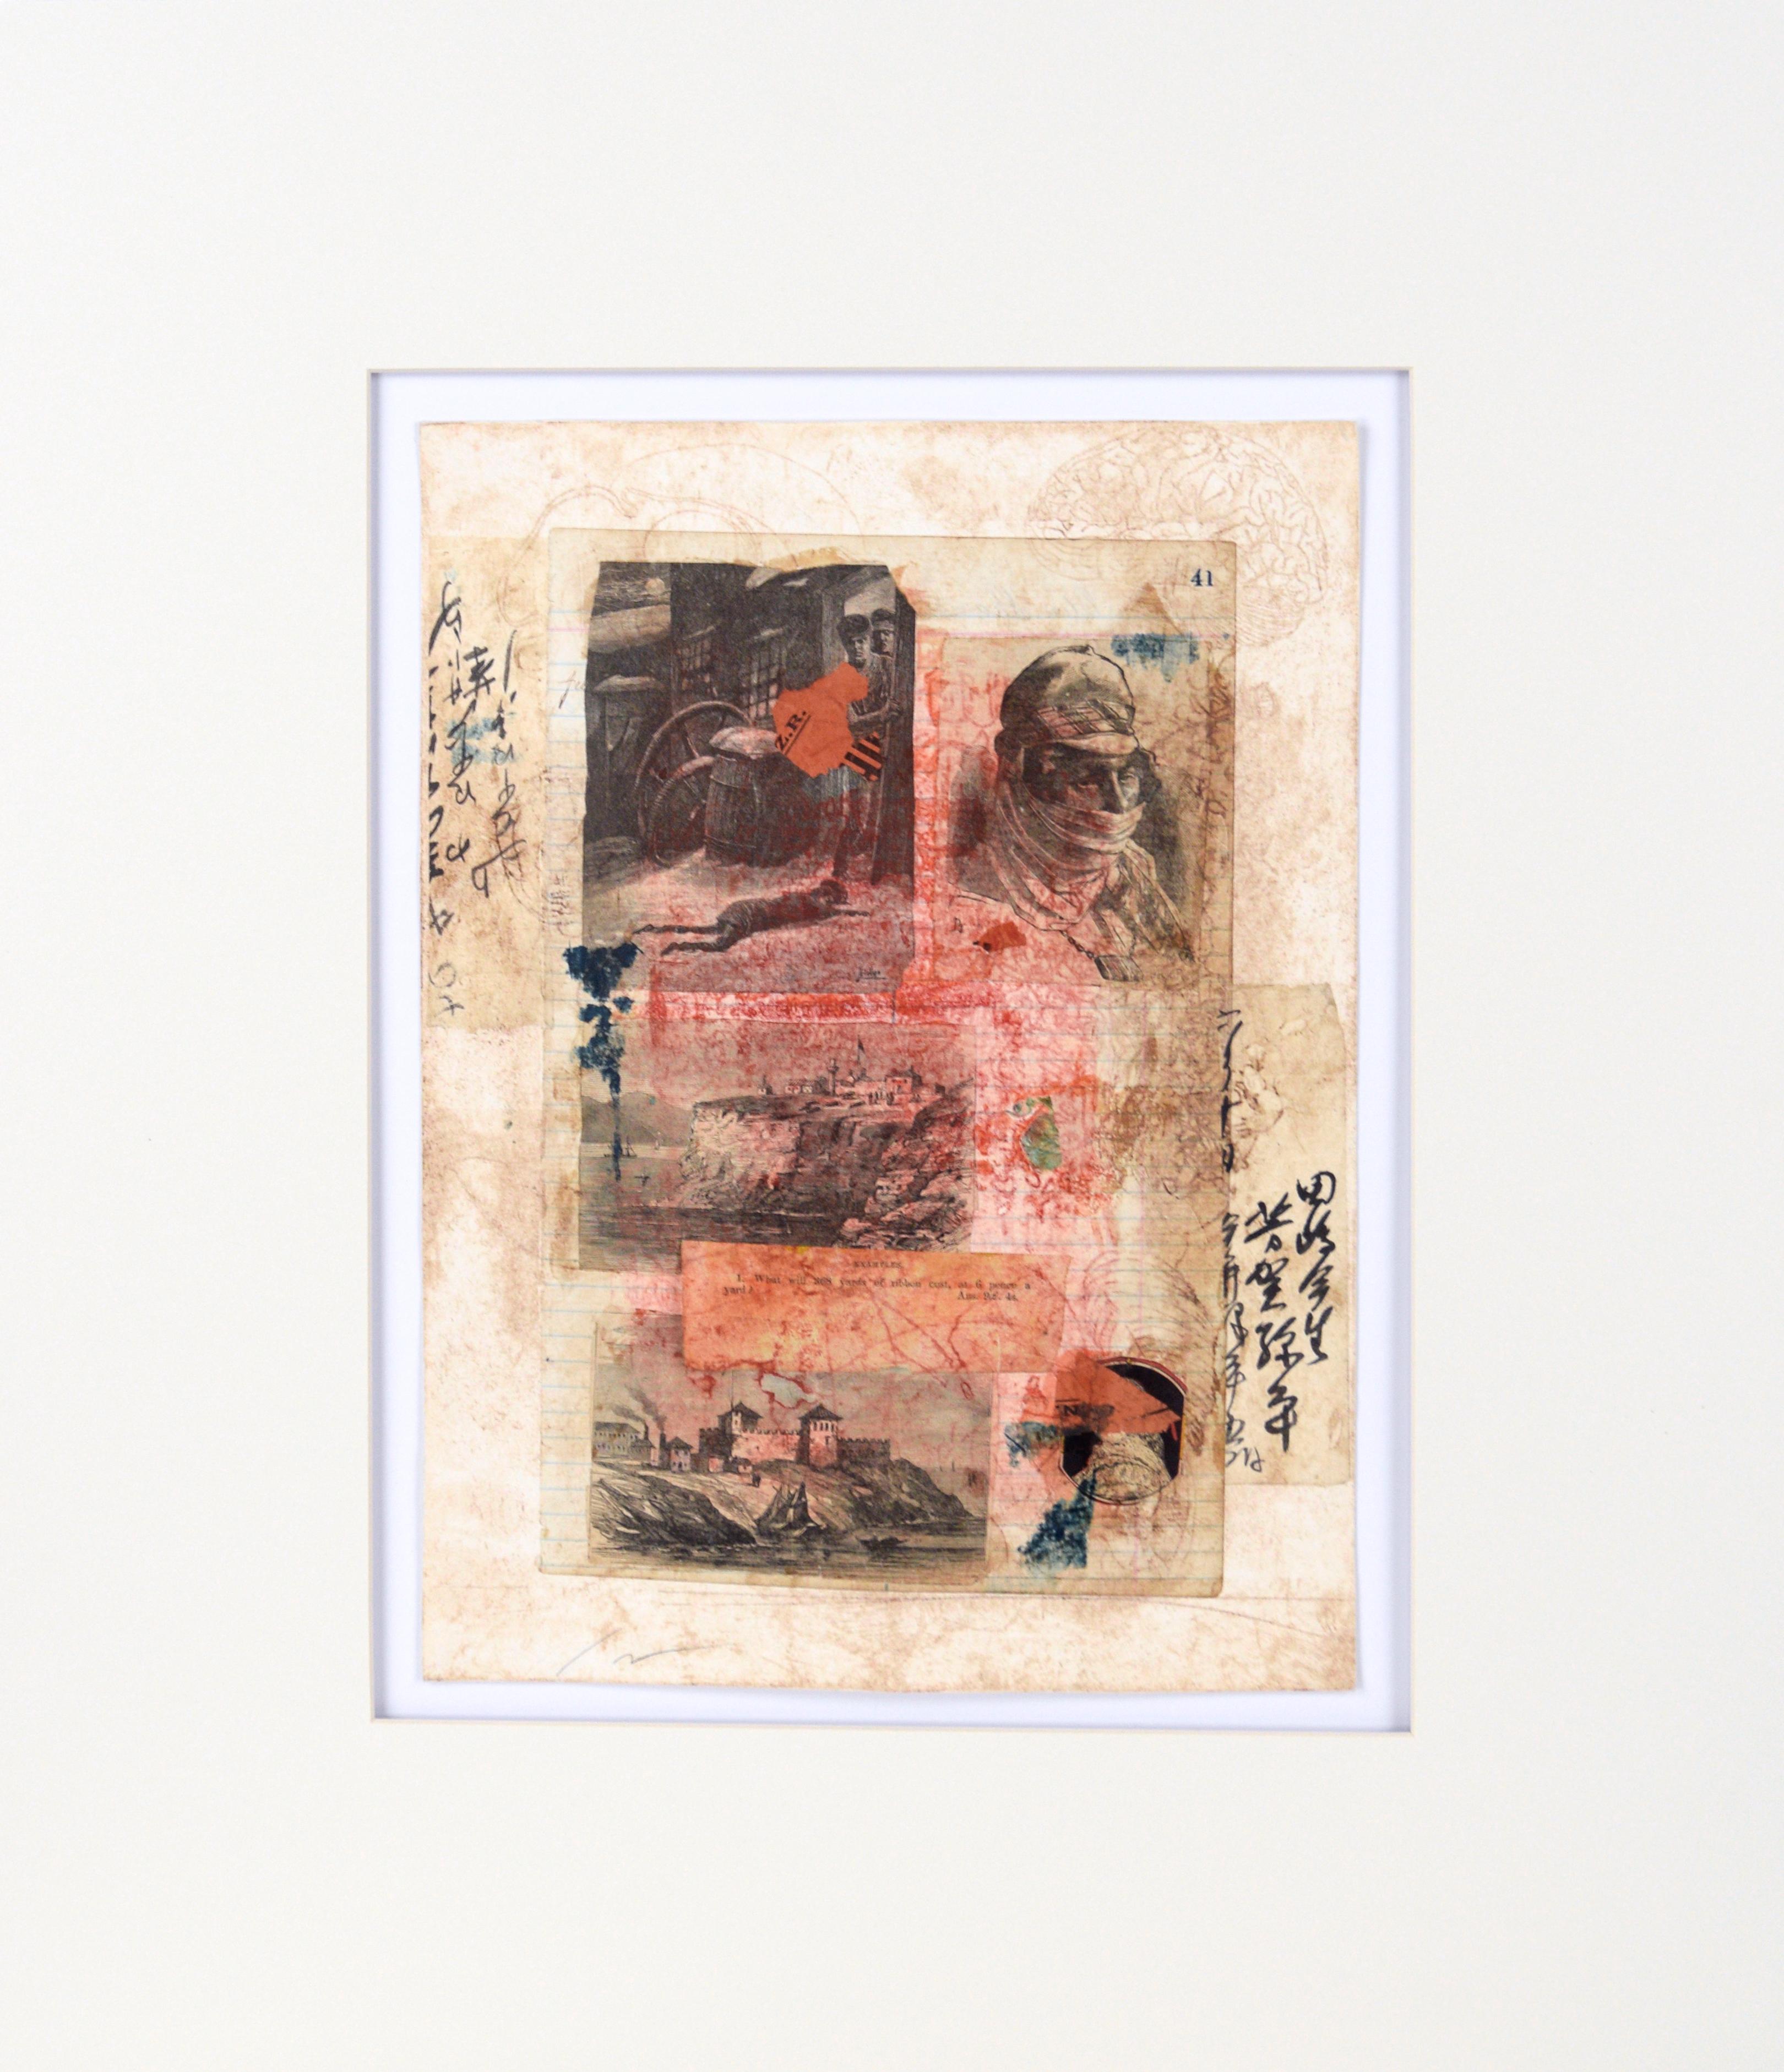 "Z.R." - Chine Colle Monoprint with Collage